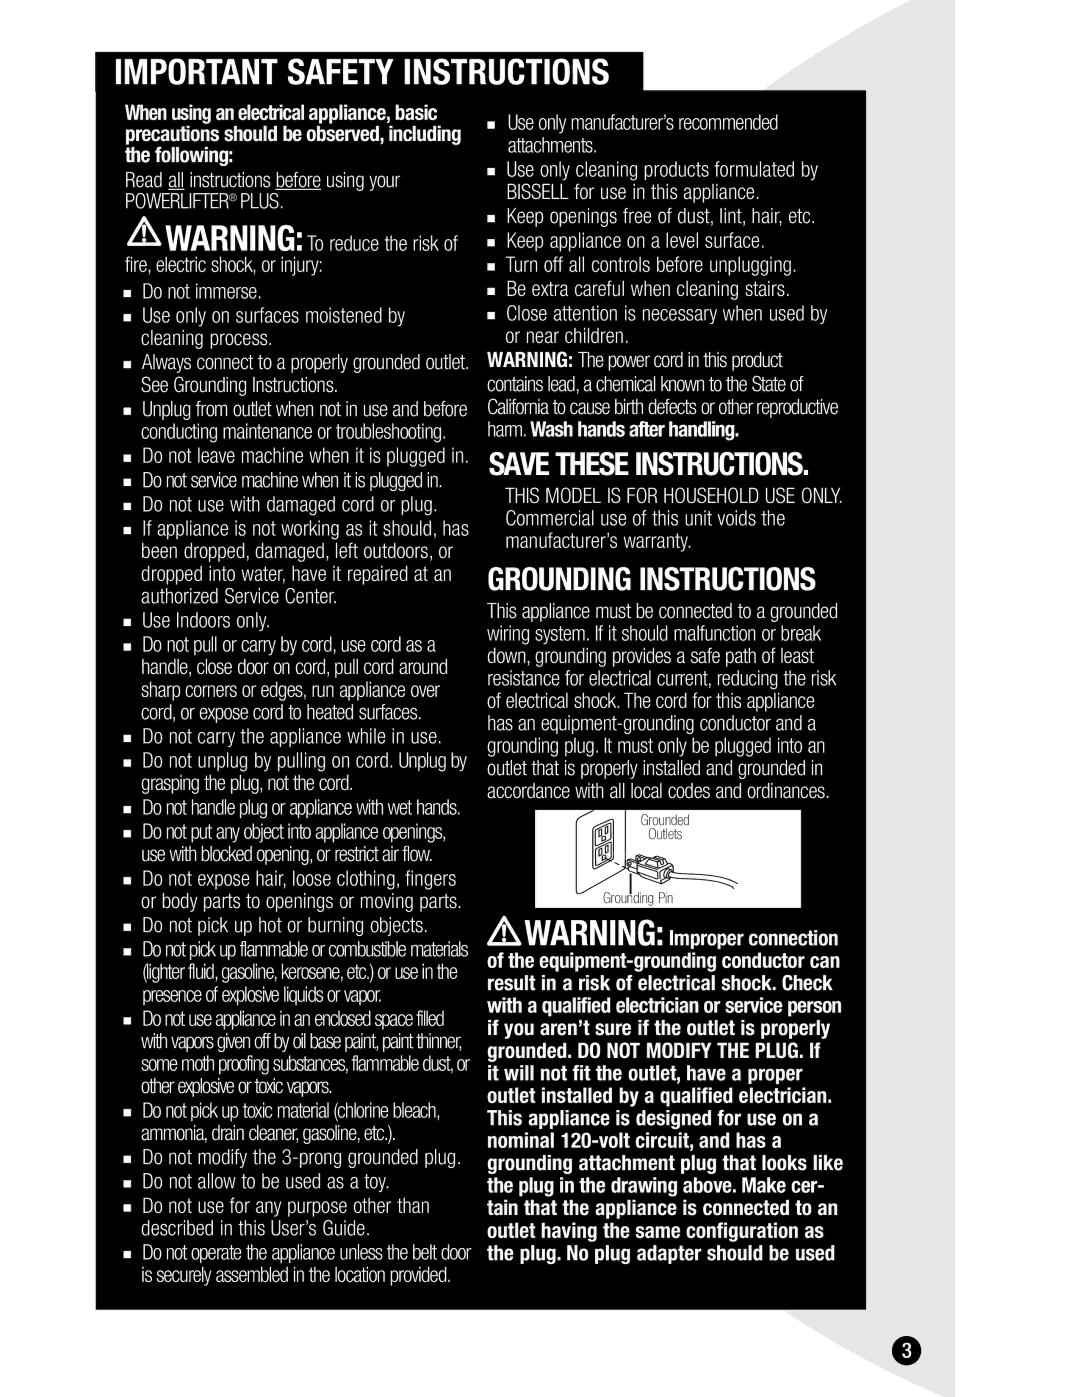 Bissell 1620 warranty Important Safety Instructions 